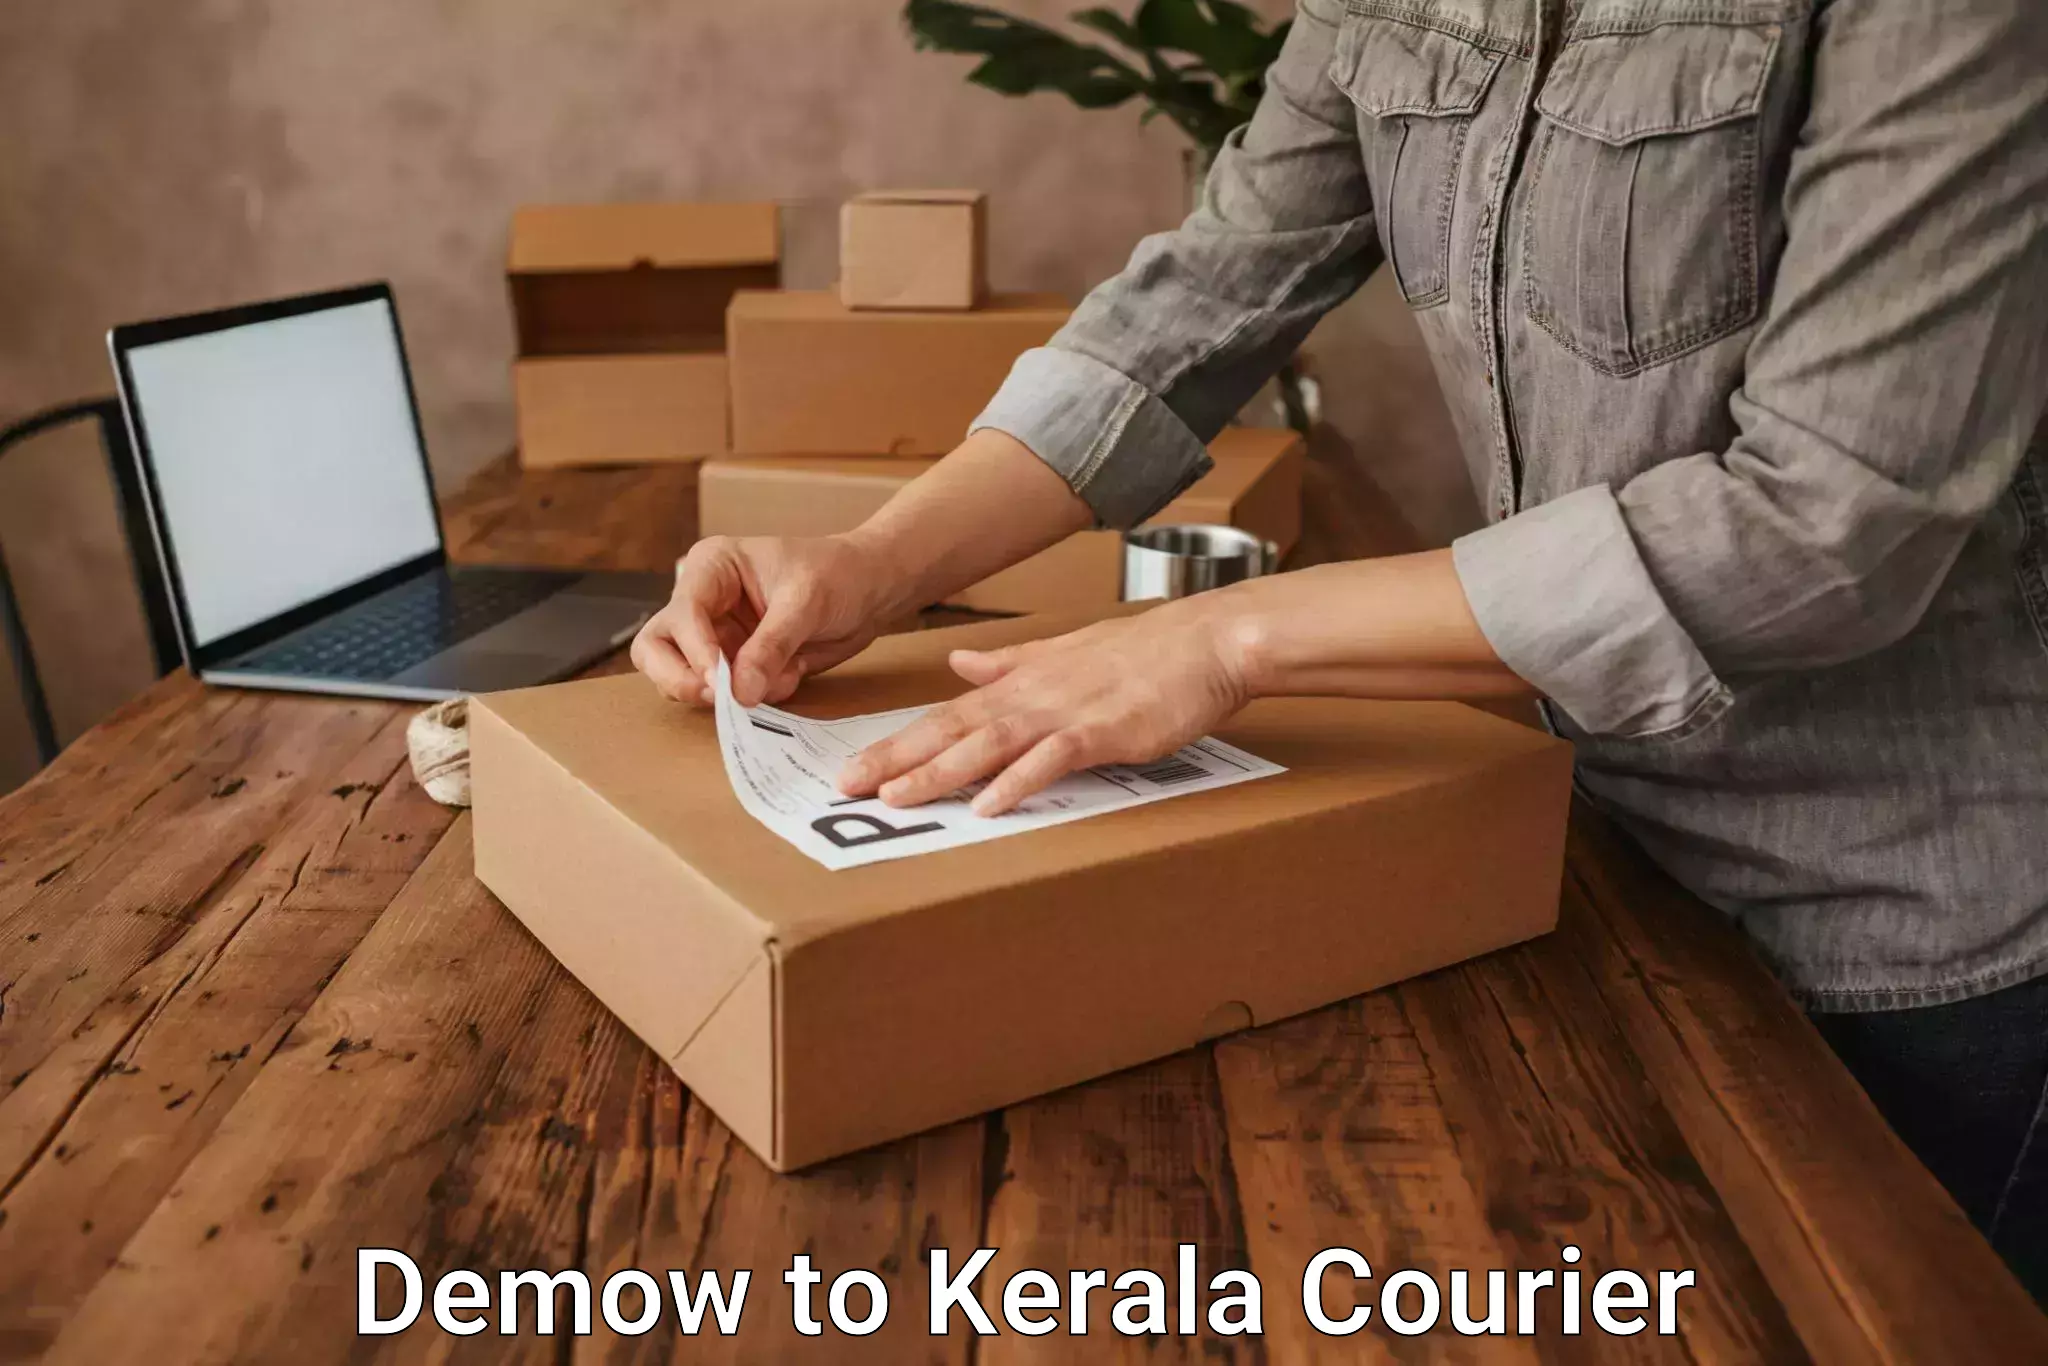 Sustainable delivery practices Demow to Kerala